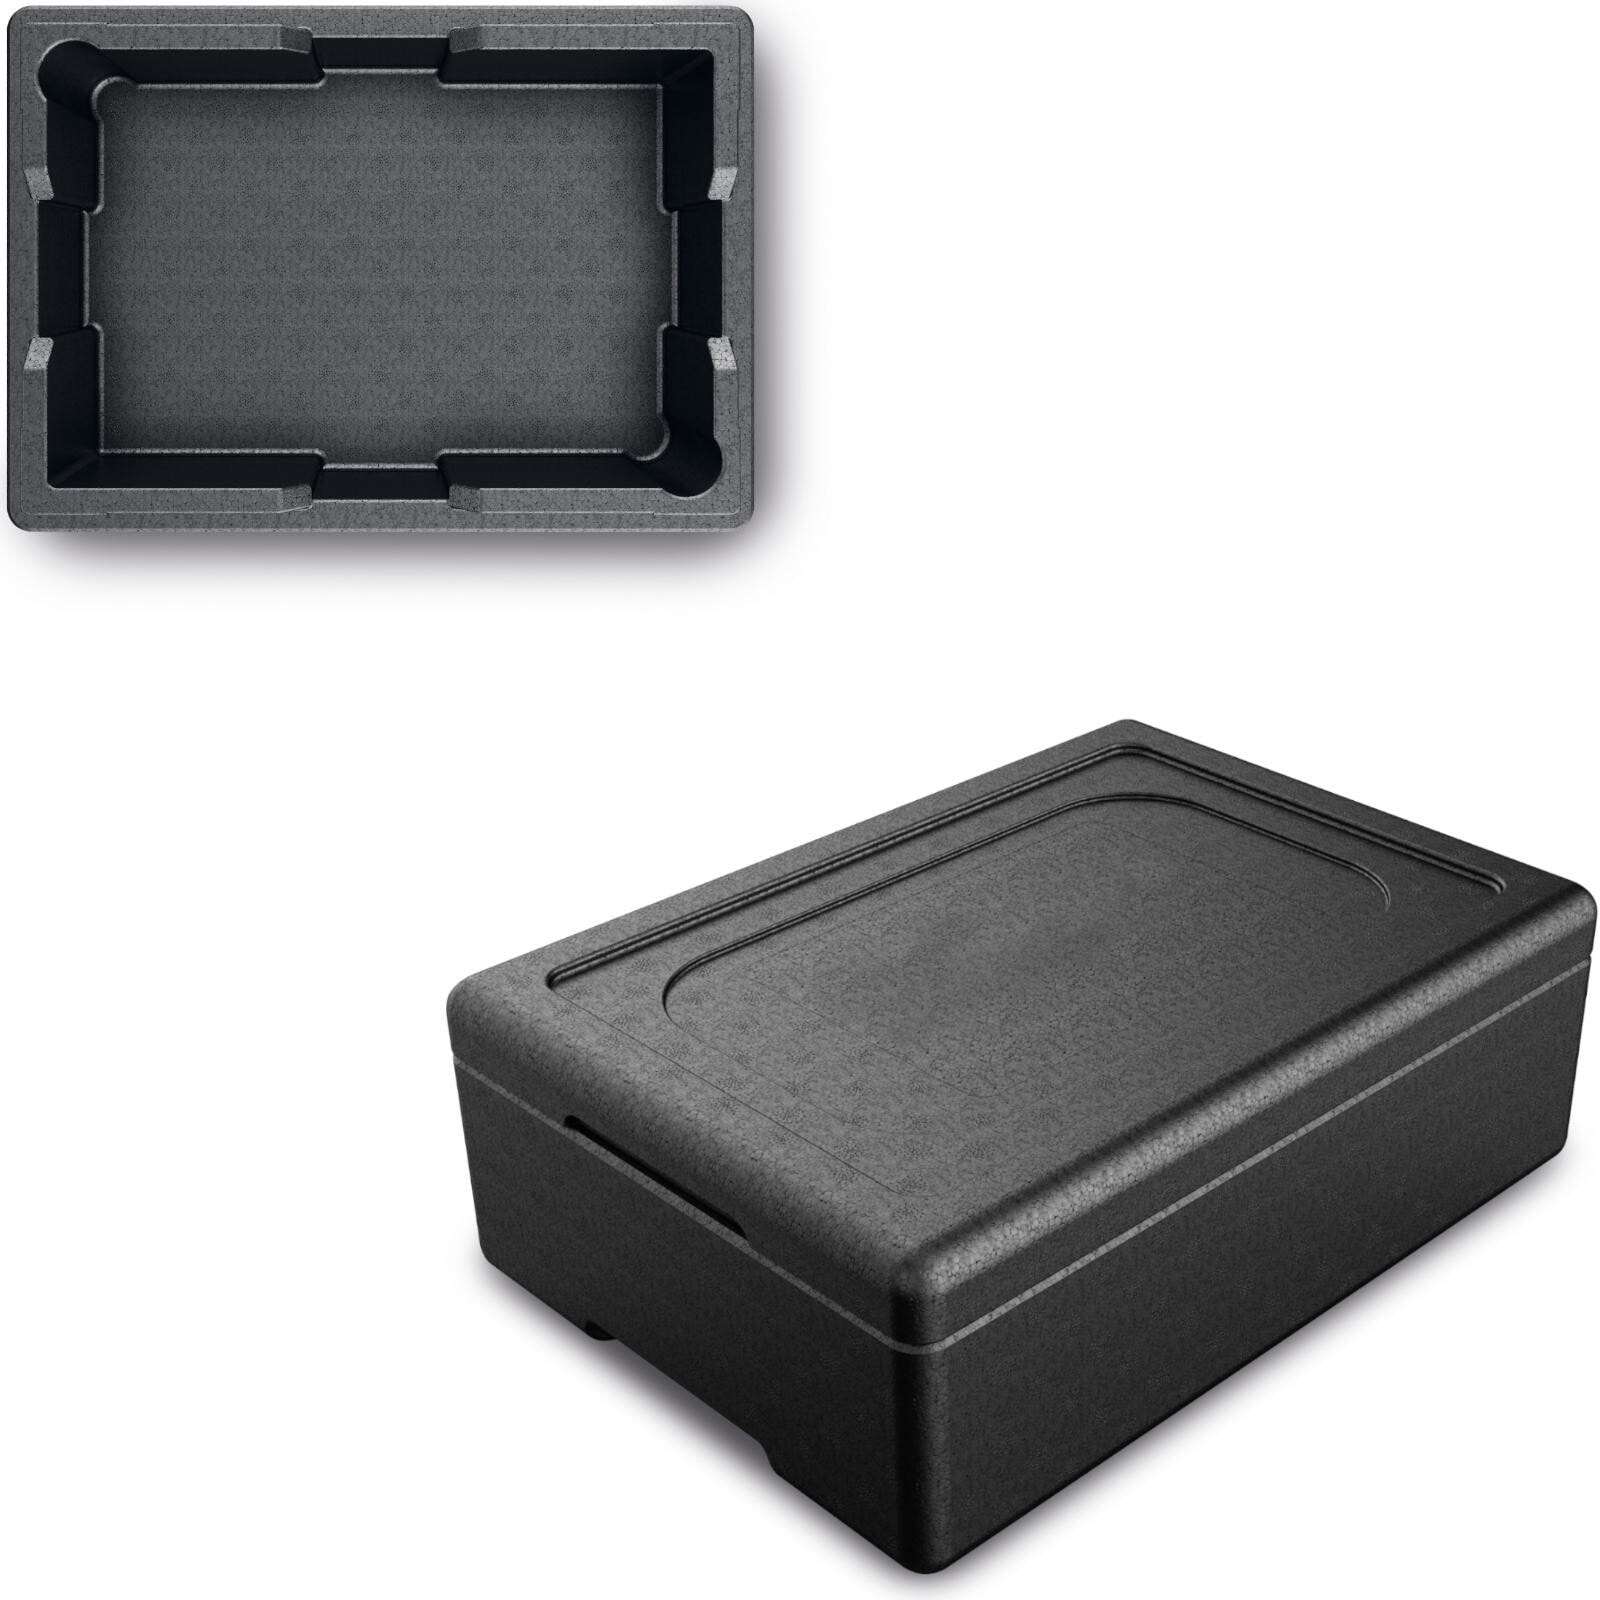 Thermal catering container for transporting food inside 38x25x9.5cm 9L